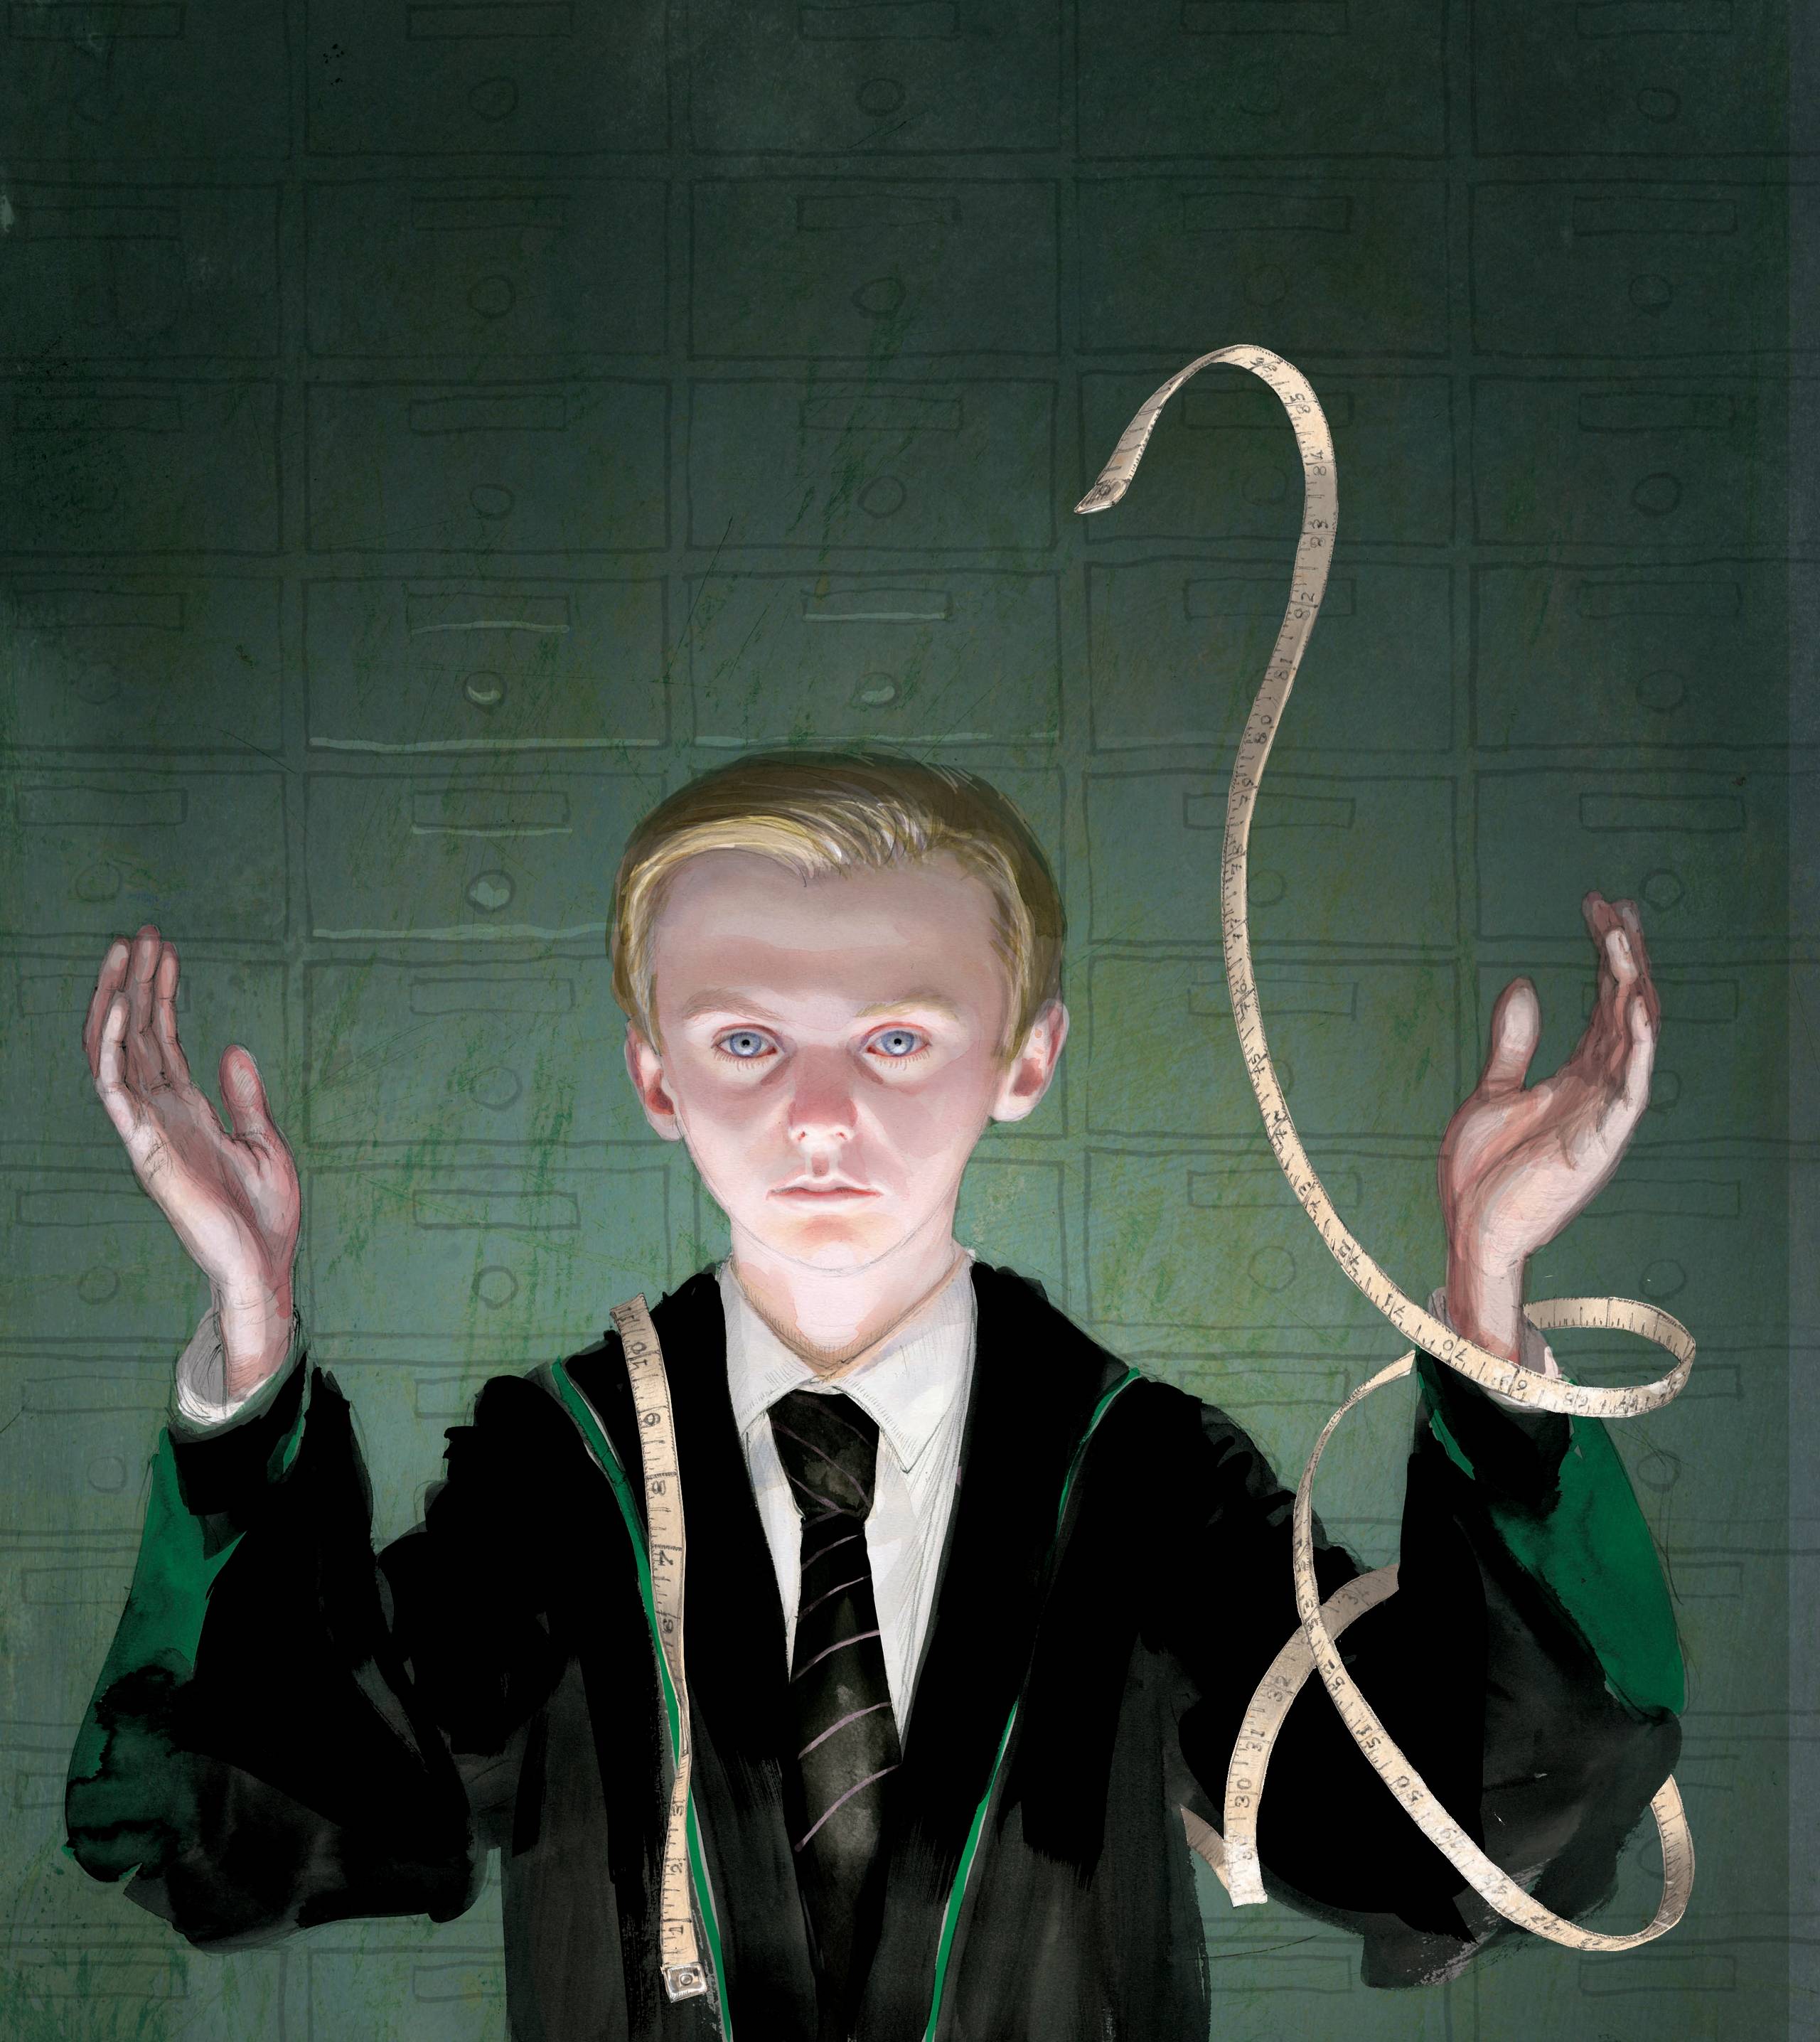 Every time Draco Malfoy was just too Draco